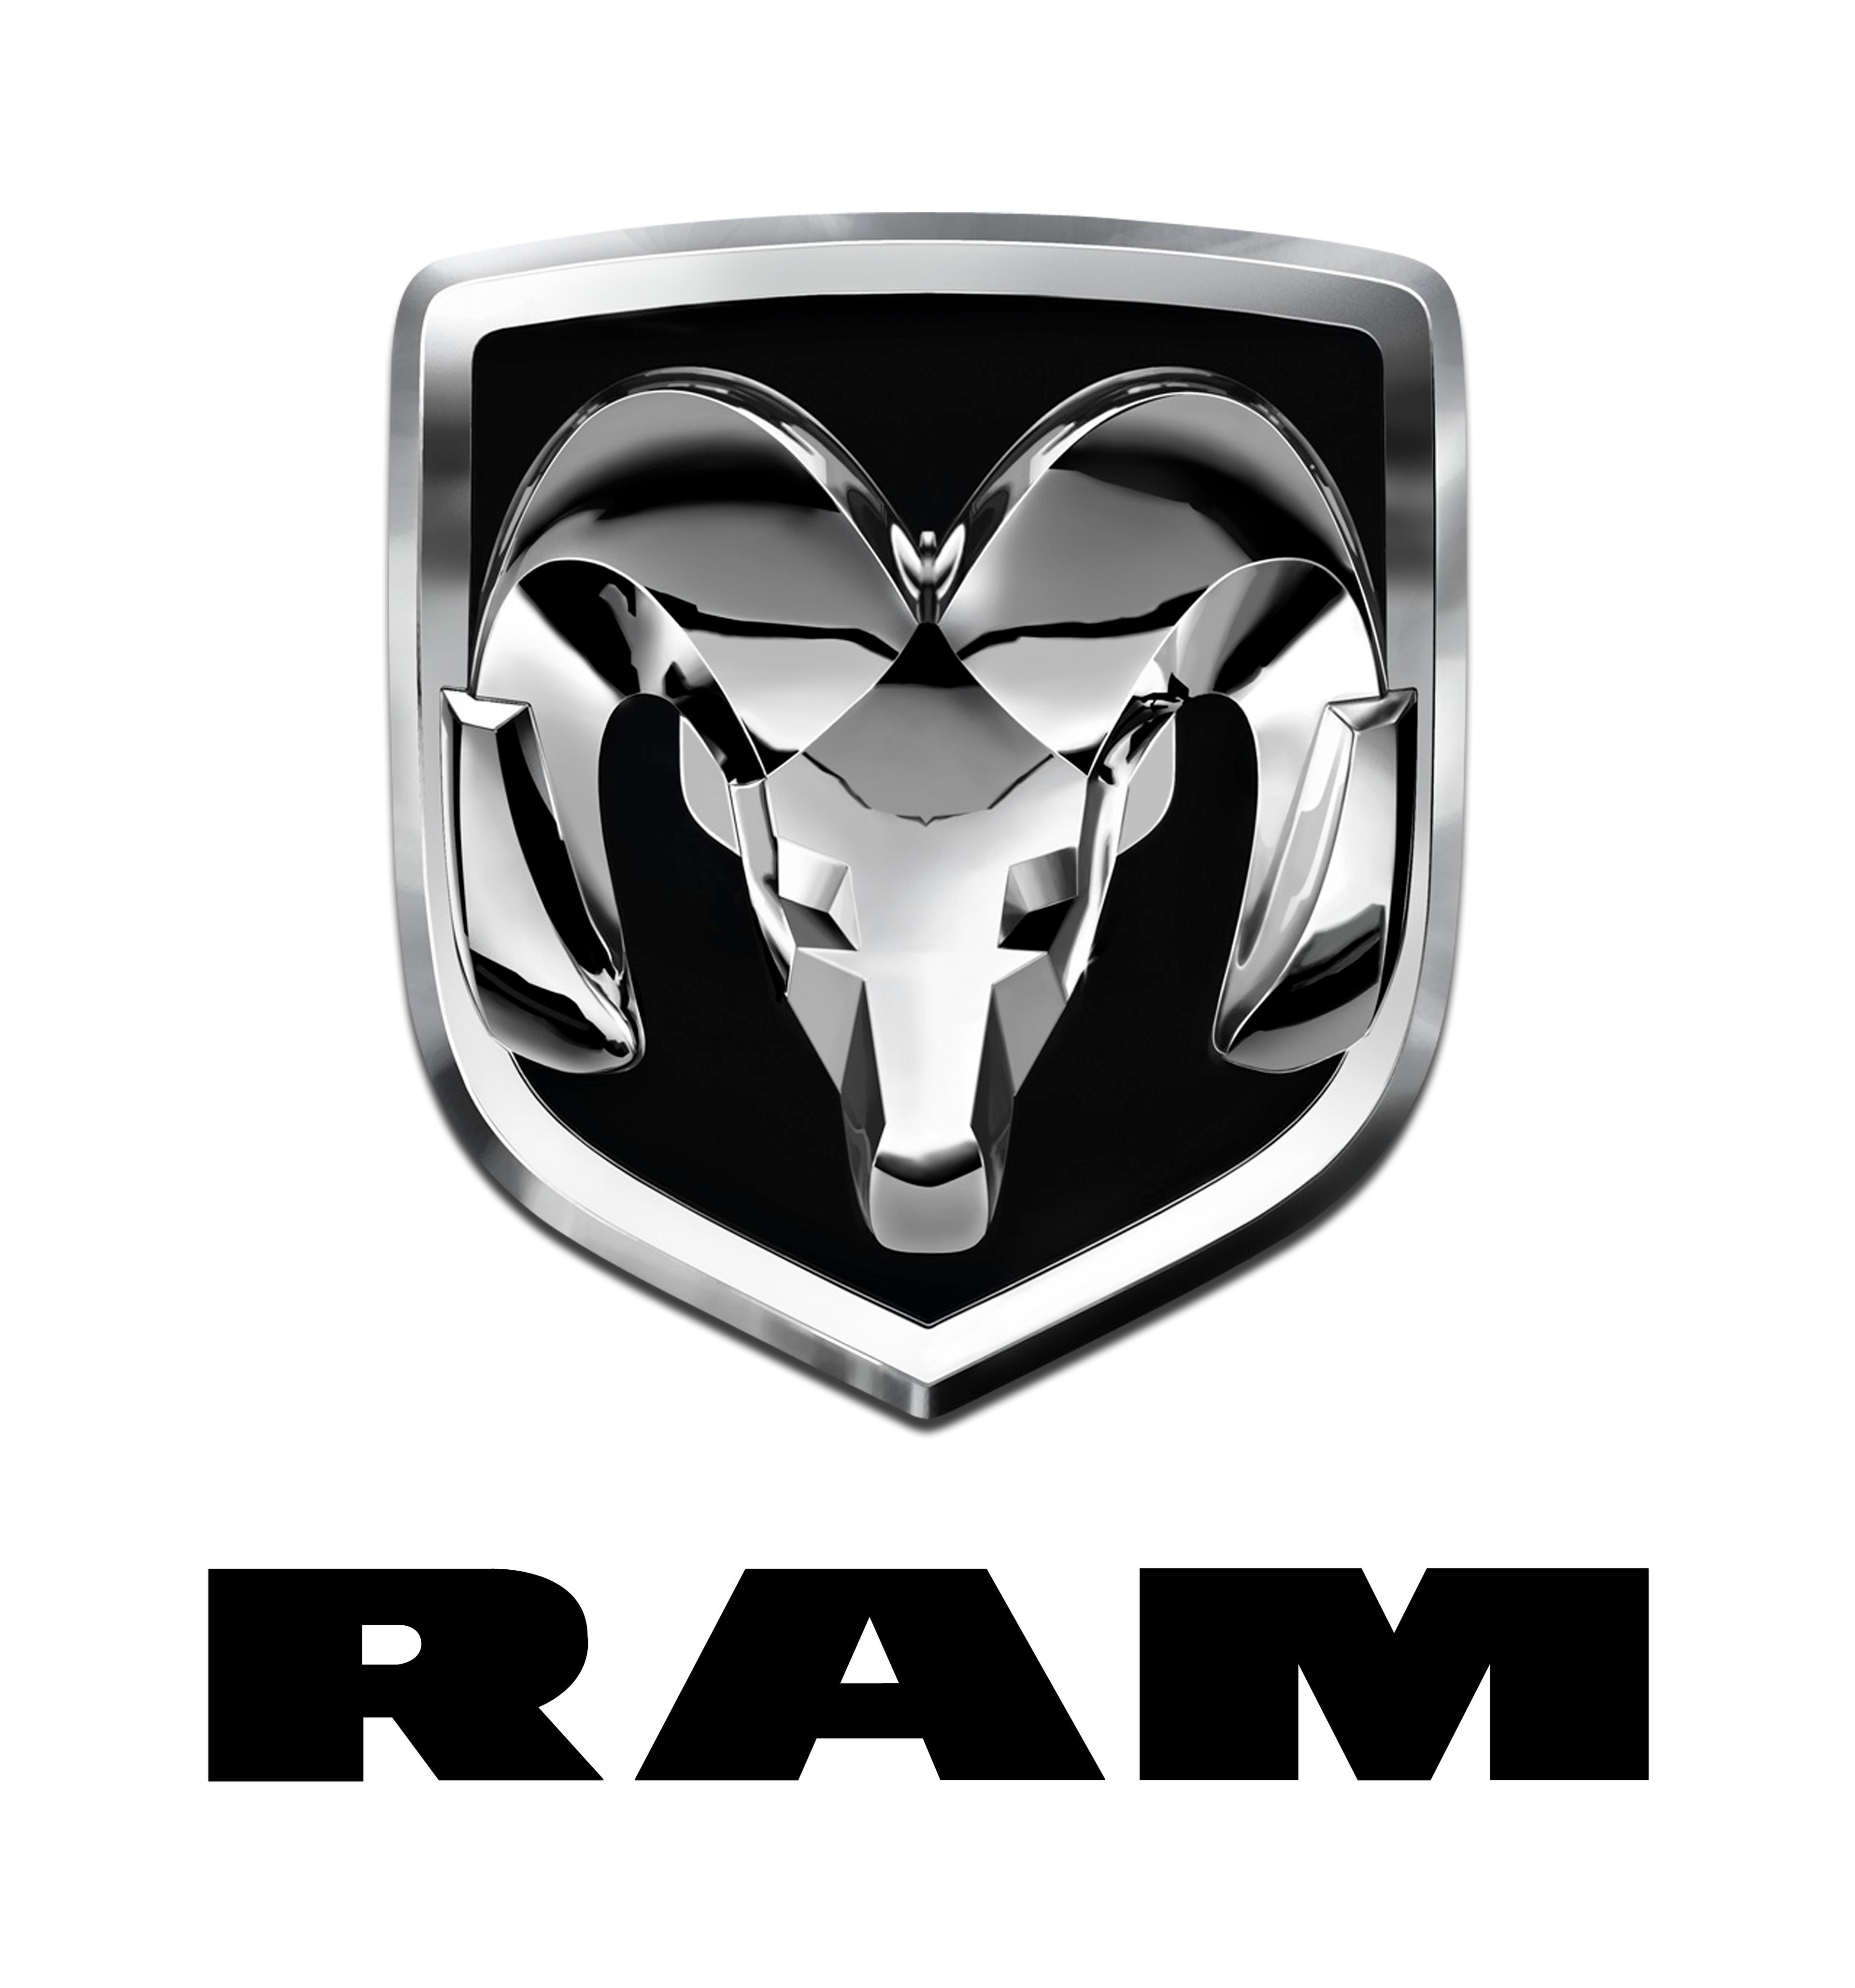 Ram has been lagging behind other truck-makers in terms of electrification.